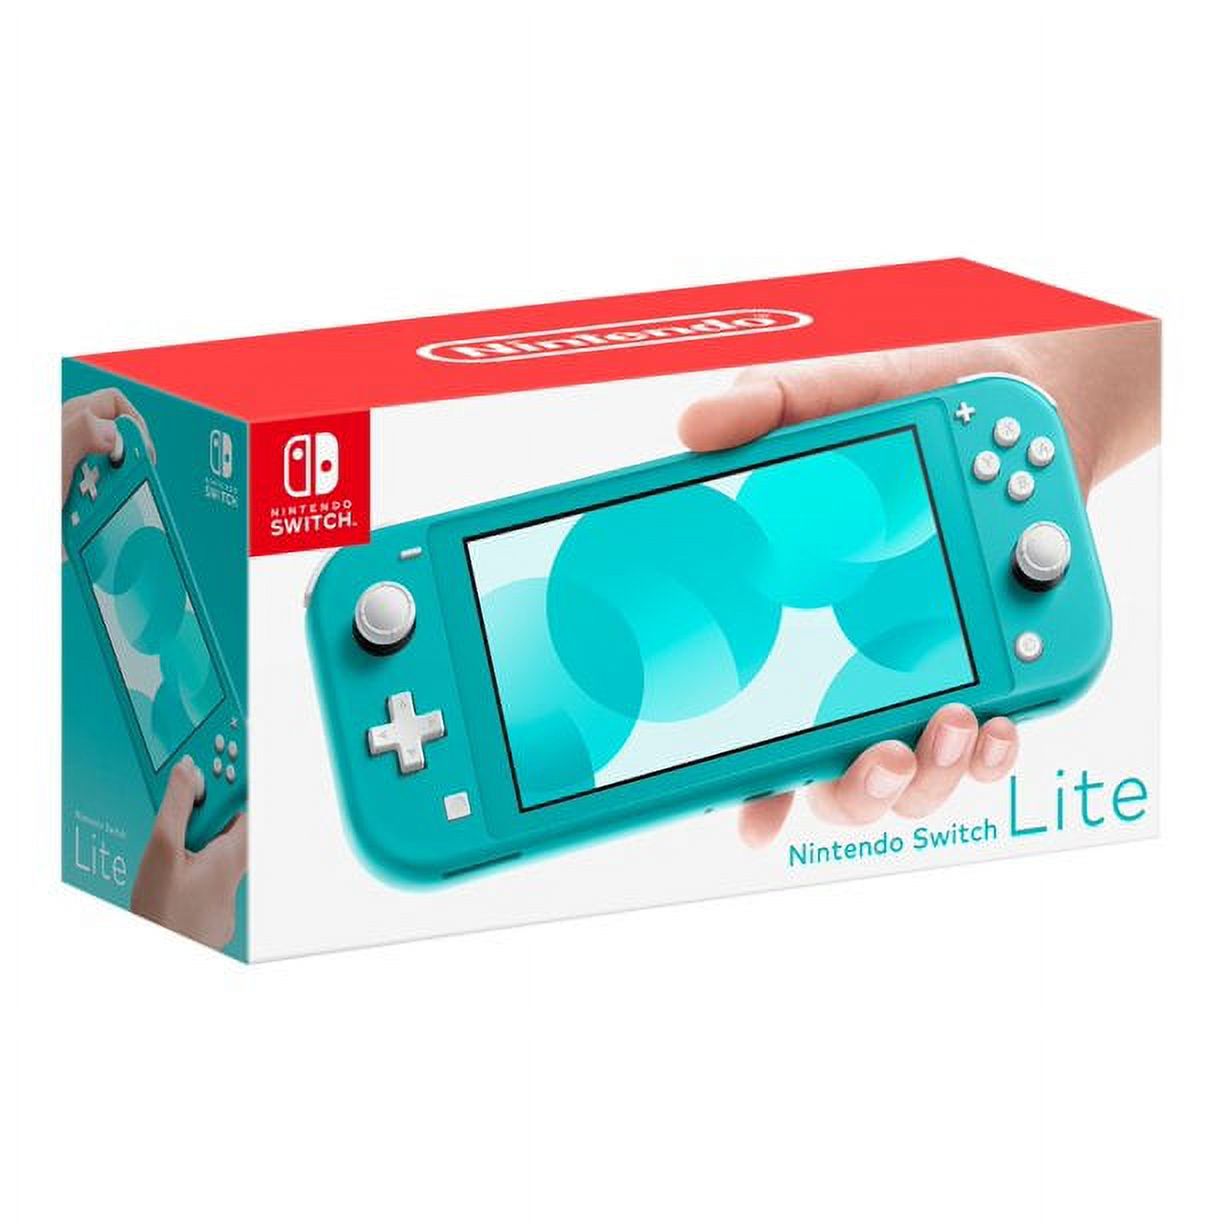 Nintendo Switch Lite - Handheld game console - turquoise - image 2 of 3